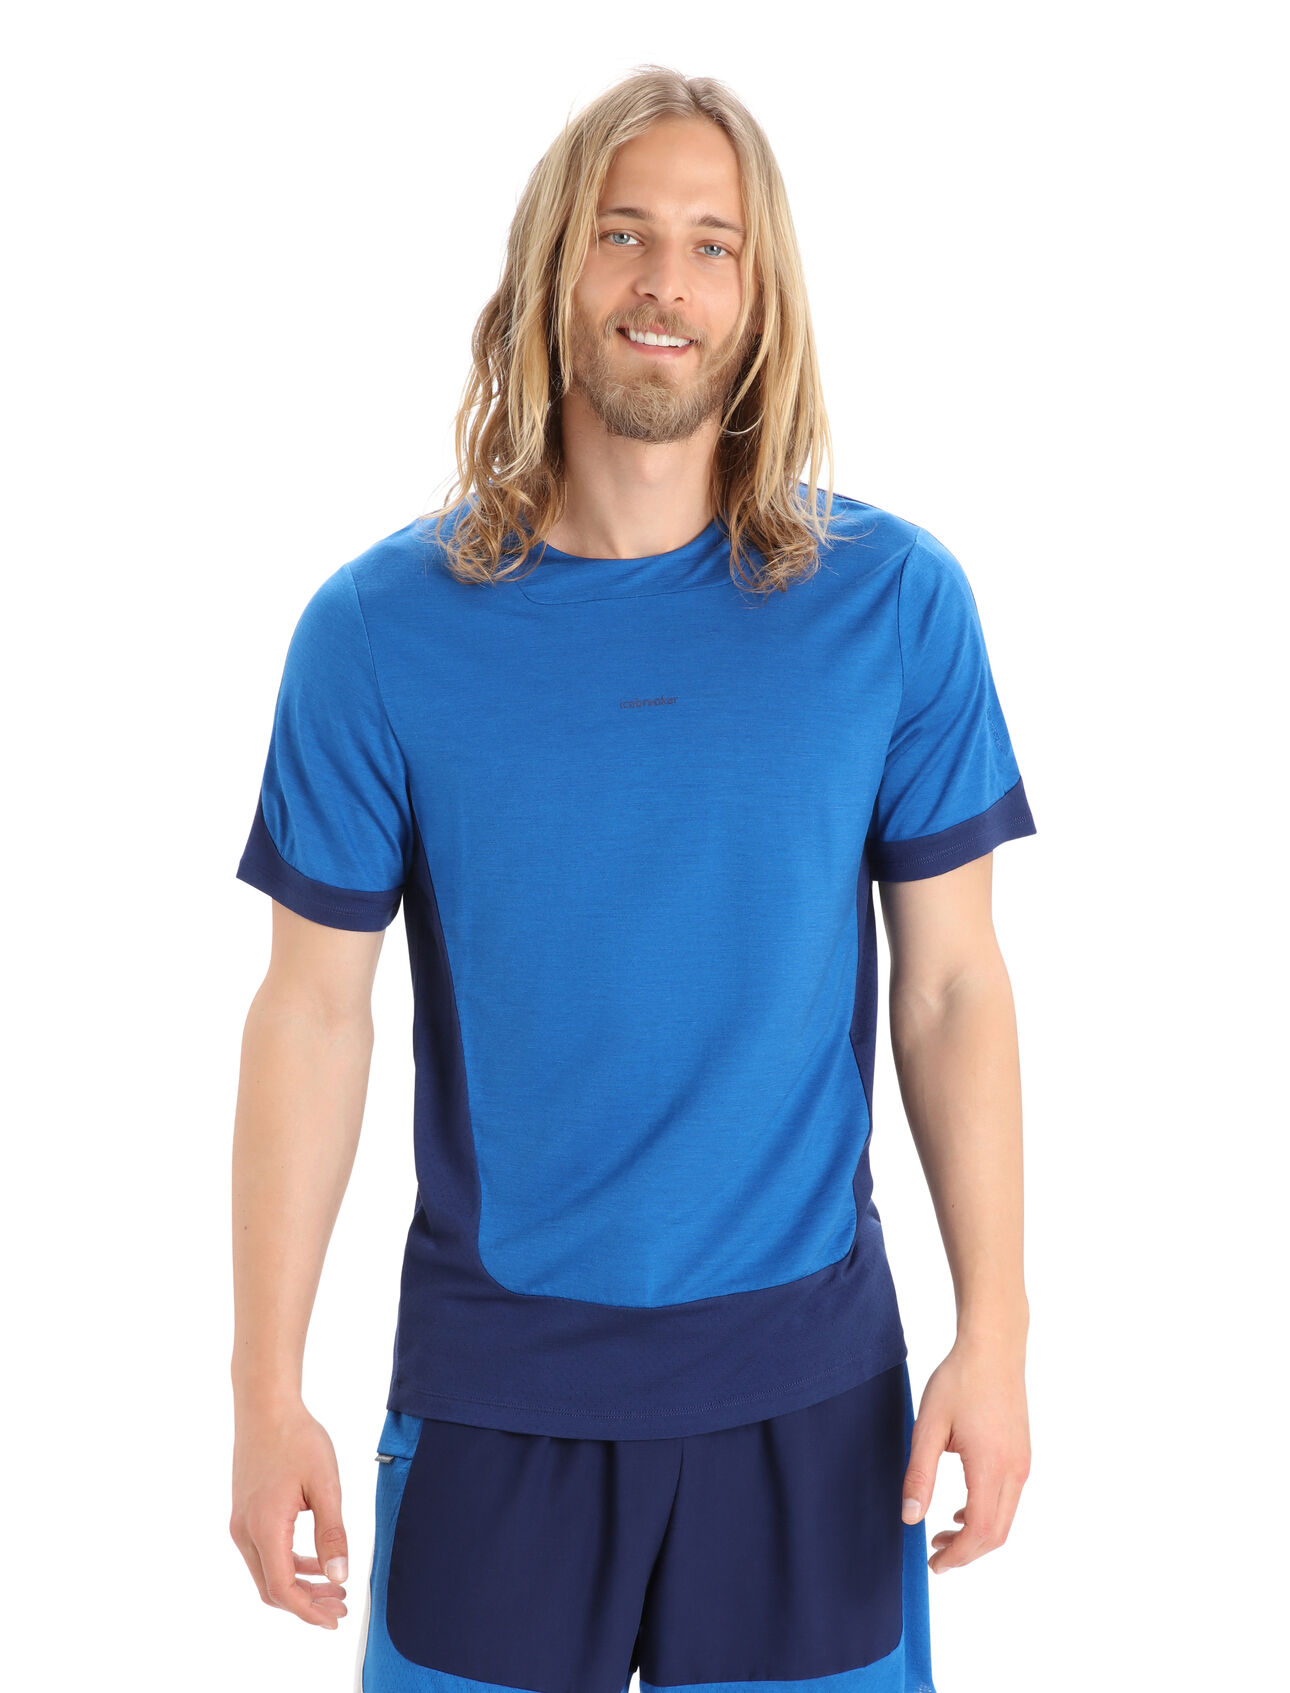 Mens ZoneKnit™ Merino Short Sleeve T-Shirt Our most breathable and lightweight tee designed for running, biking and other high exertion pursuits, the ZoneKnit™ Short Sleeve Tee combines our Cool-Lite™ jersey fabric with strategic panels of eyelet mesh for enhanced airflow.